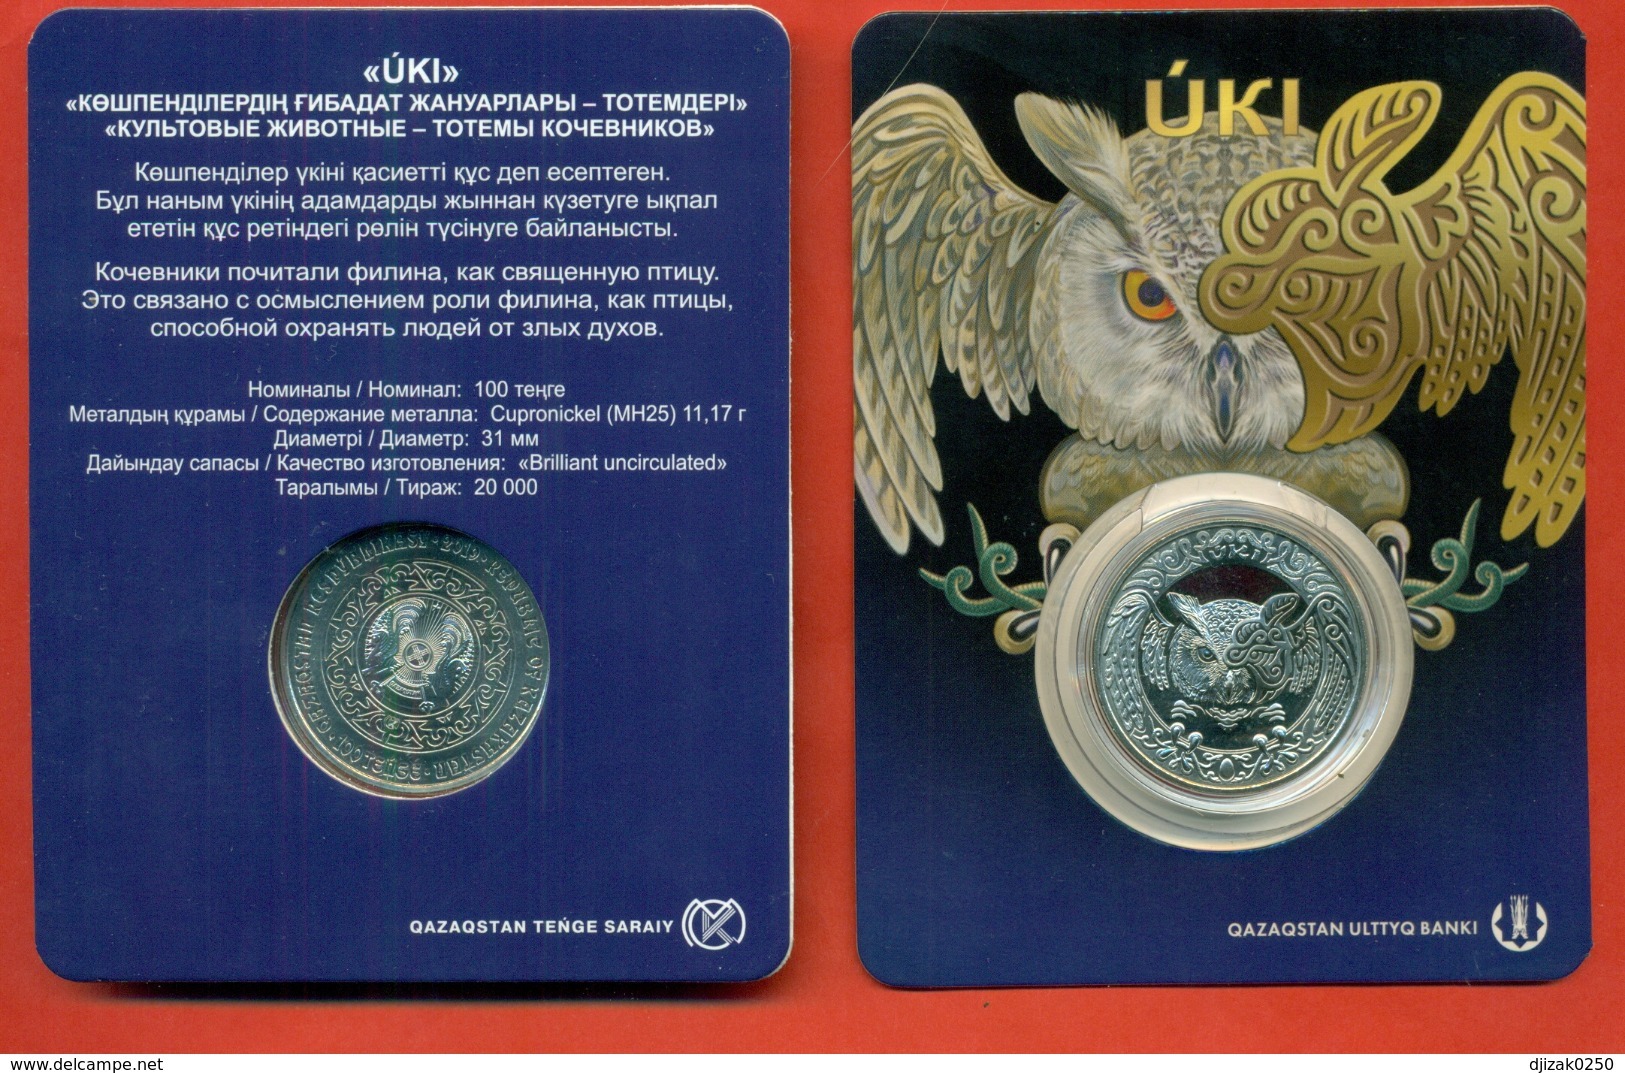 Kazakhstan 2019.Lot Of Two Commemorative Coins "Eagle Owl" - 100 Tenge In A Blister And 200 Tenge With Gilding In A Box. - Kazakhstan